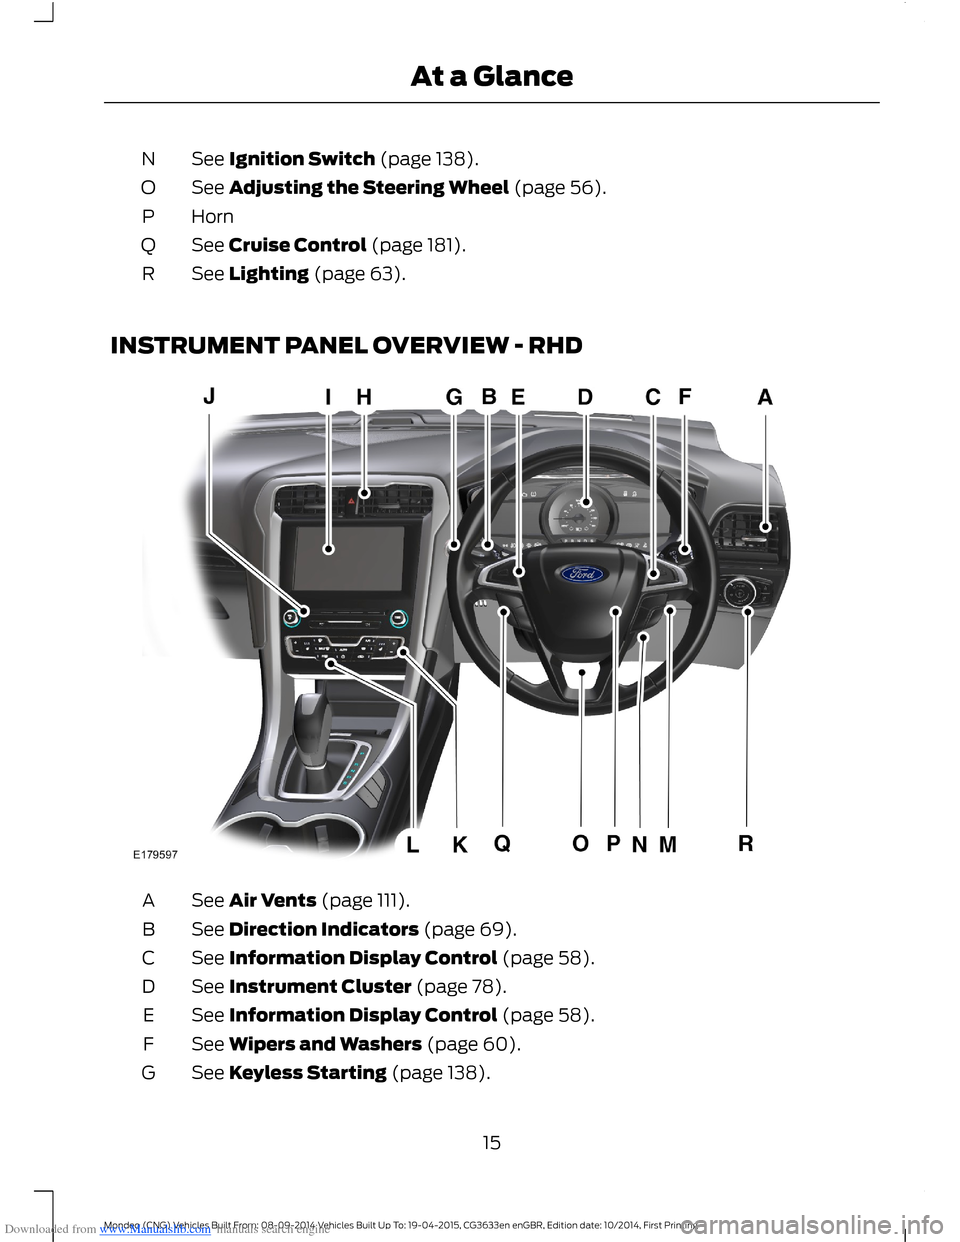 FORD MONDEO 2014 4.G Owners Manual Downloaded from www.Manualslib.com manuals search engine See Ignition Switch (page 138).N
See Adjusting the Steering Wheel (page 56).O
HornP
See Cruise Control (page 181).Q
See Lighting (page 63).R
IN